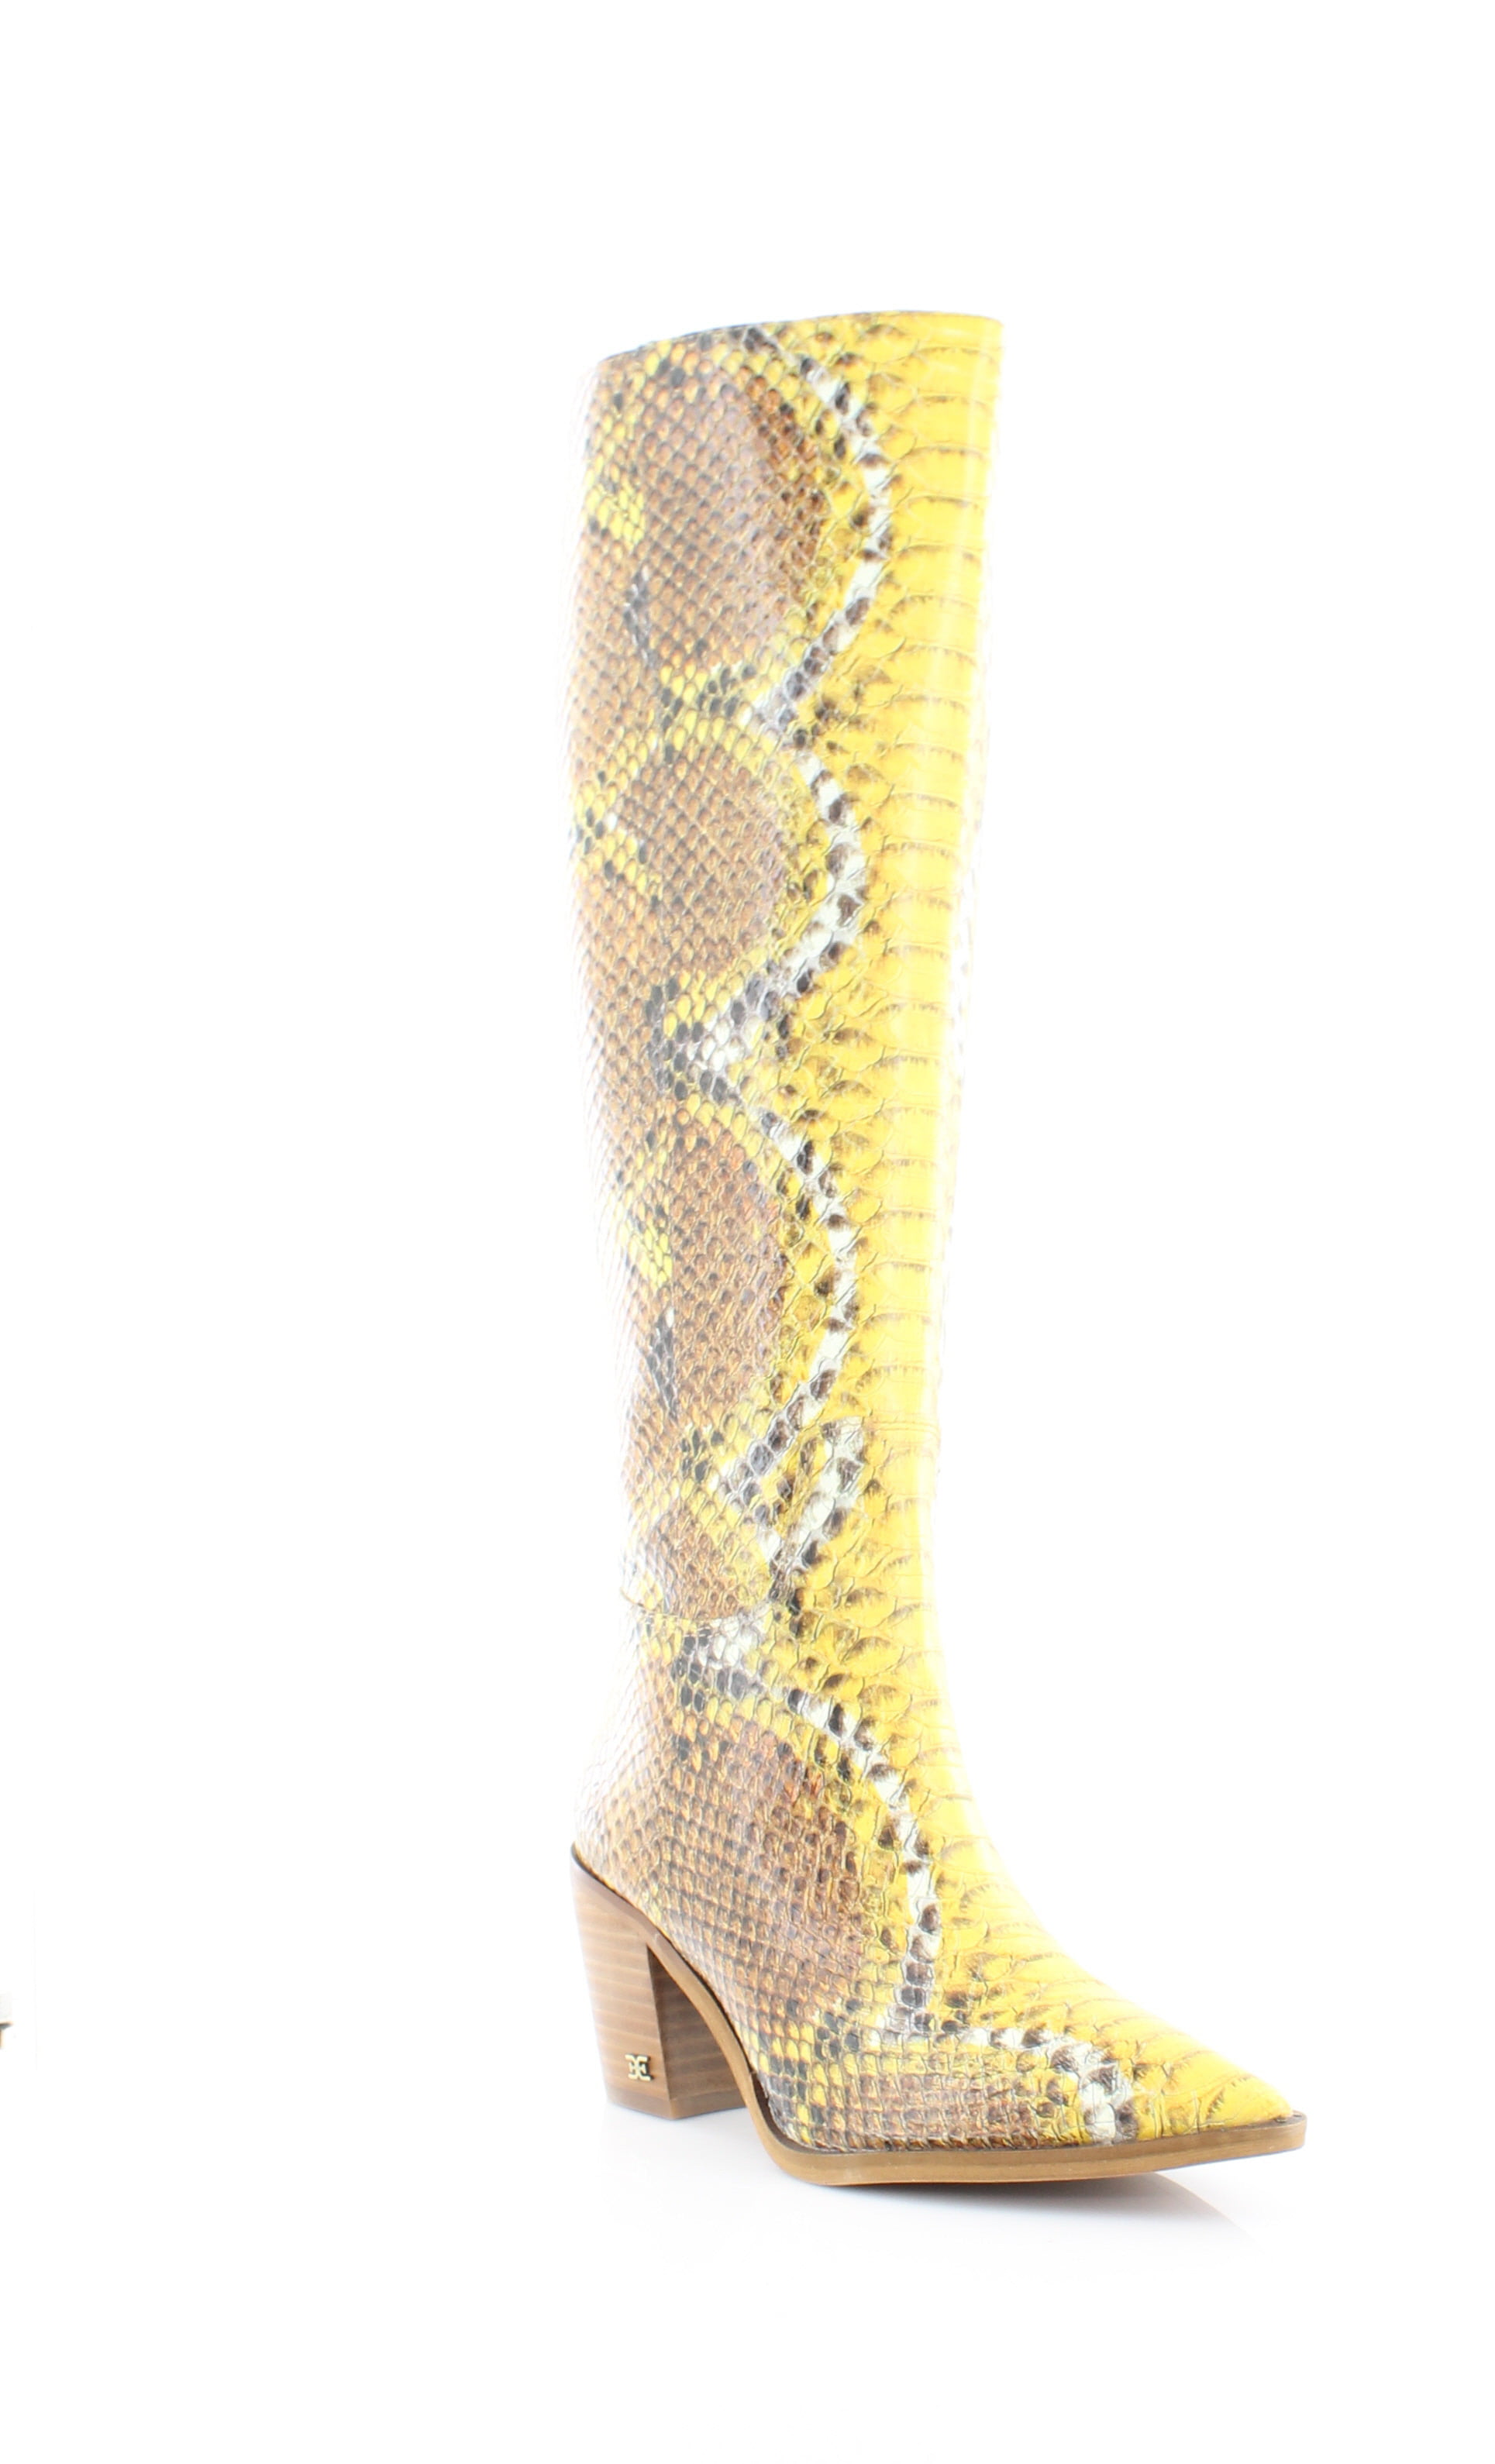 Jeffrey Campbell PILLAR-HI Ivory Nude Suede High Heel Pointed Toe Over Knee Boot